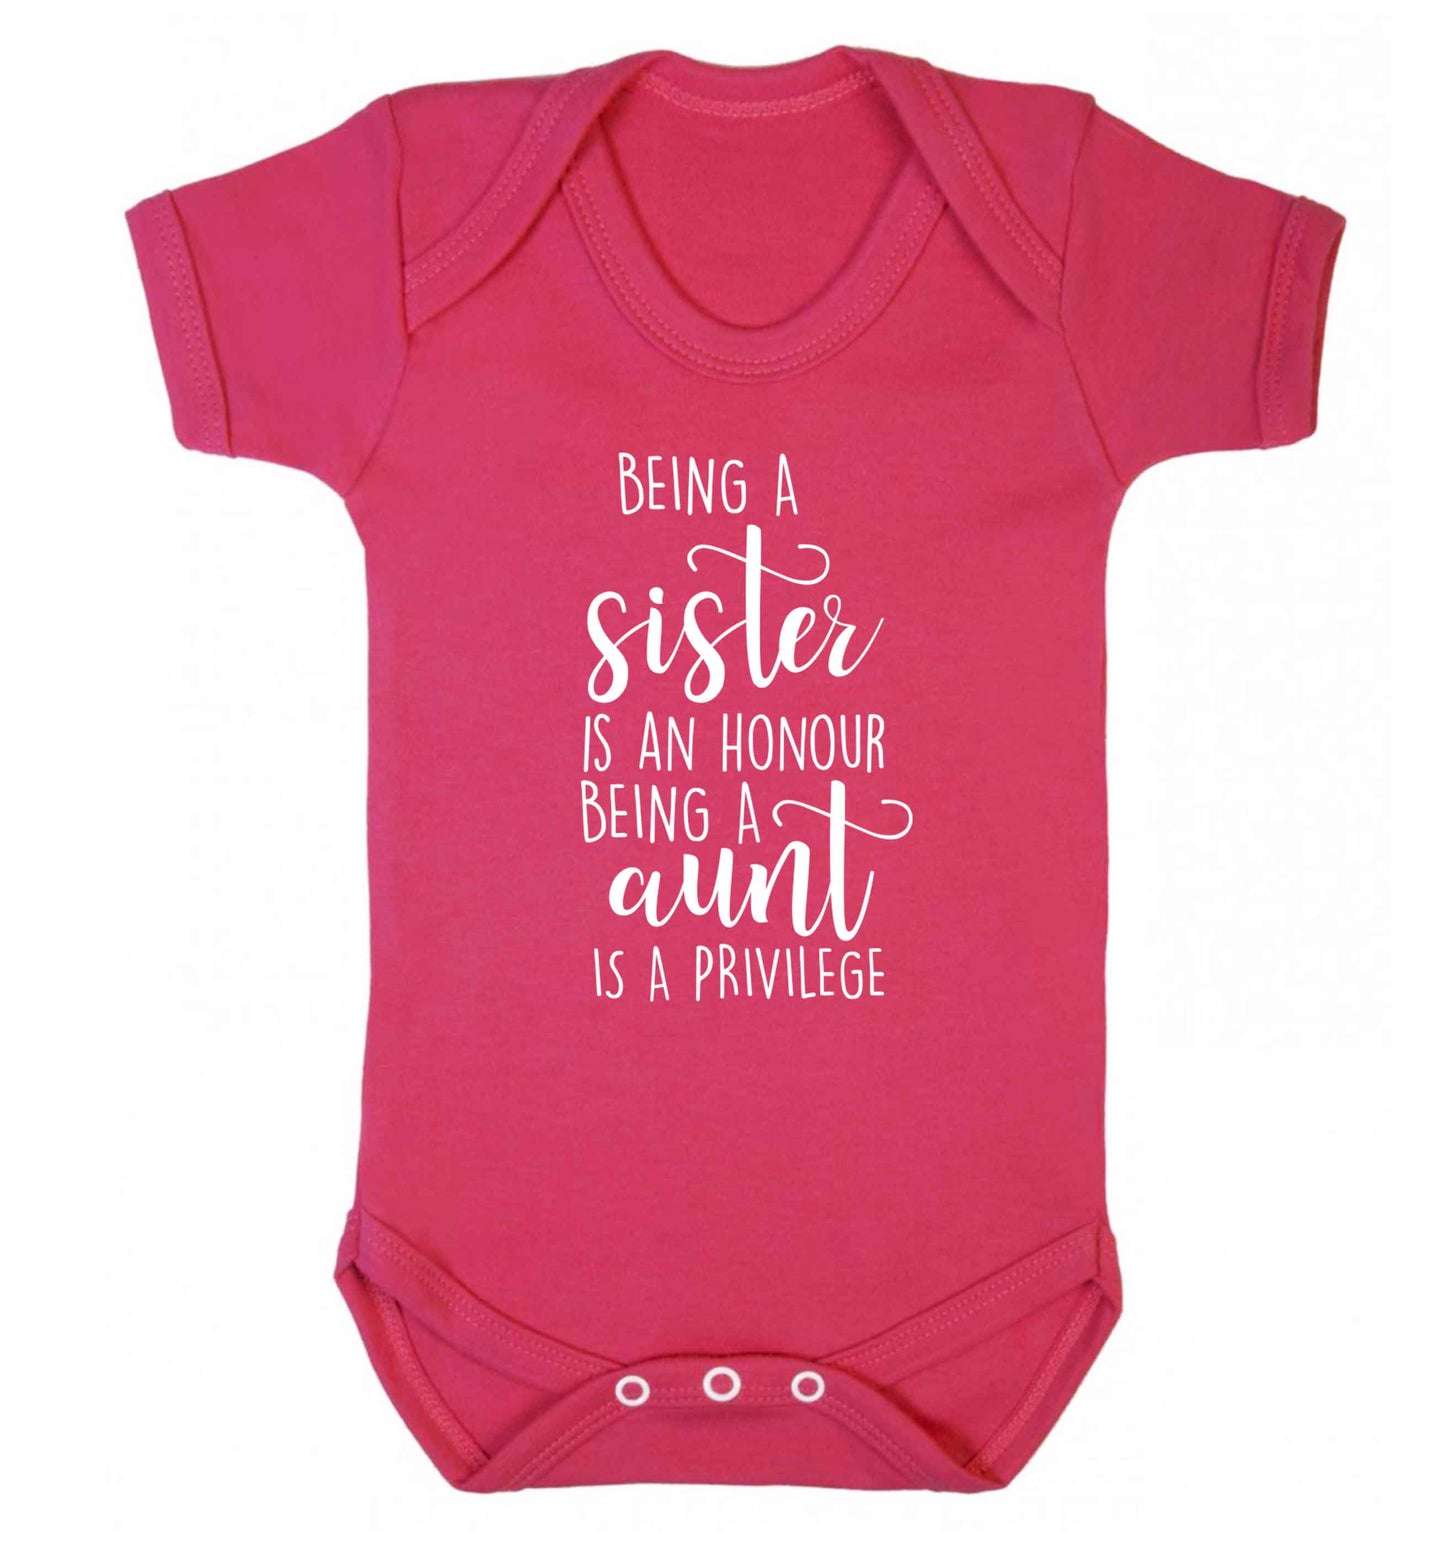 Being a sister is an honour being an auntie is a privilege Baby Vest dark pink 18-24 months